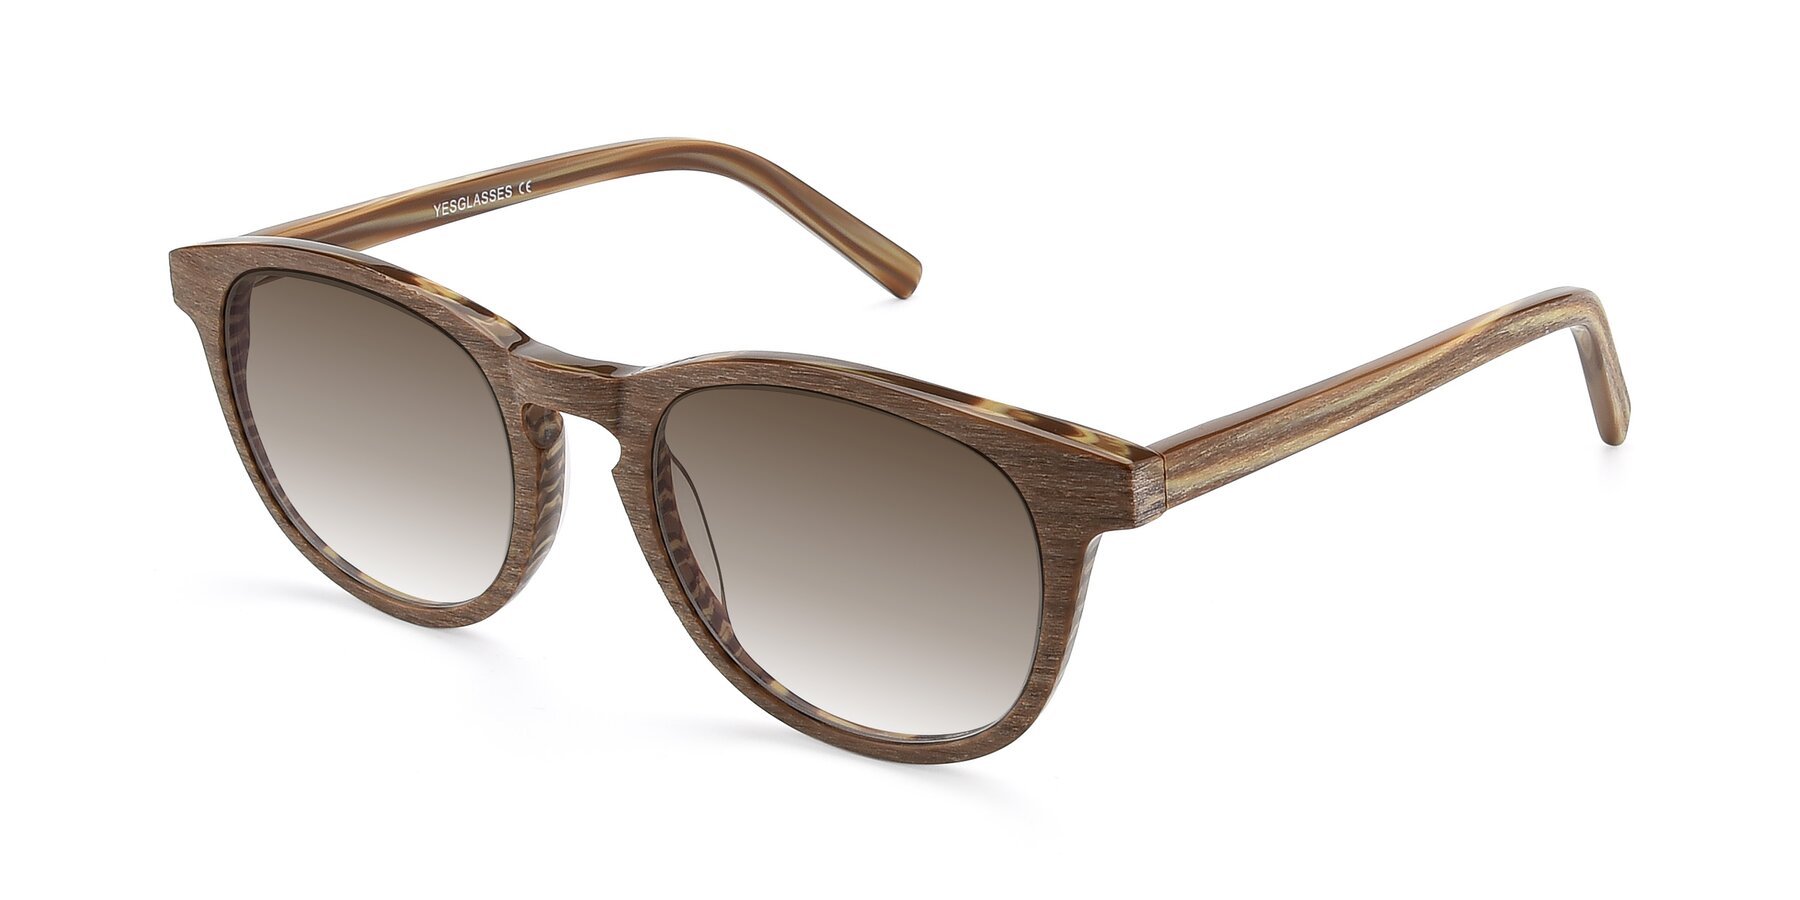 Angle of SR6044 in Brown-Wooden with Brown Gradient Lenses